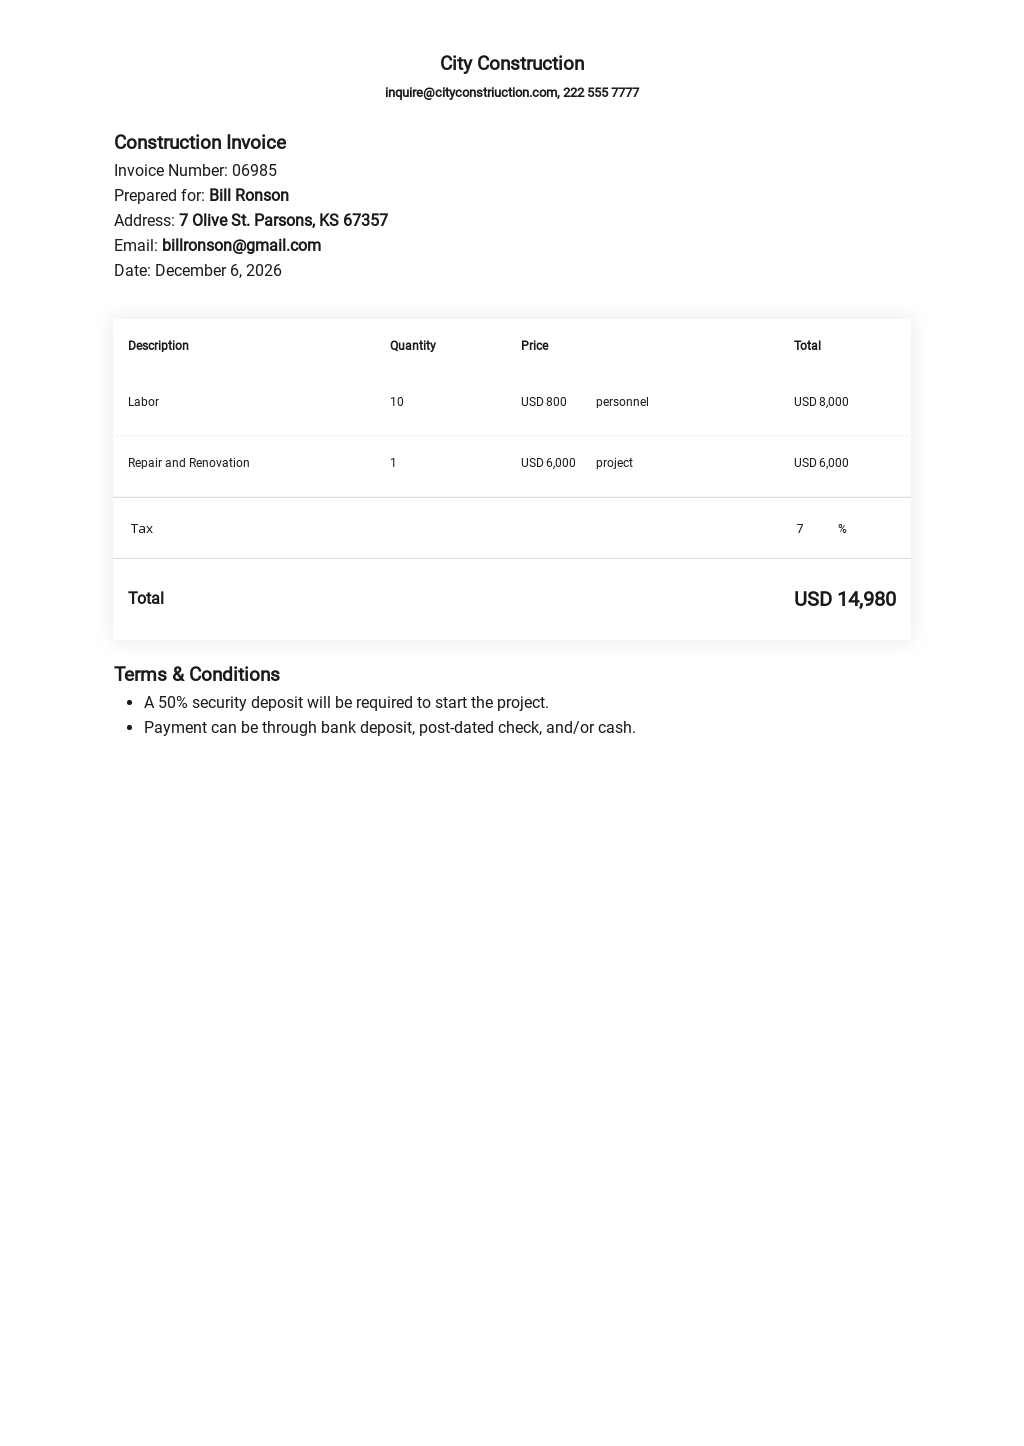 FREE Construction Invoice Template in Microsoft Word (DOC)